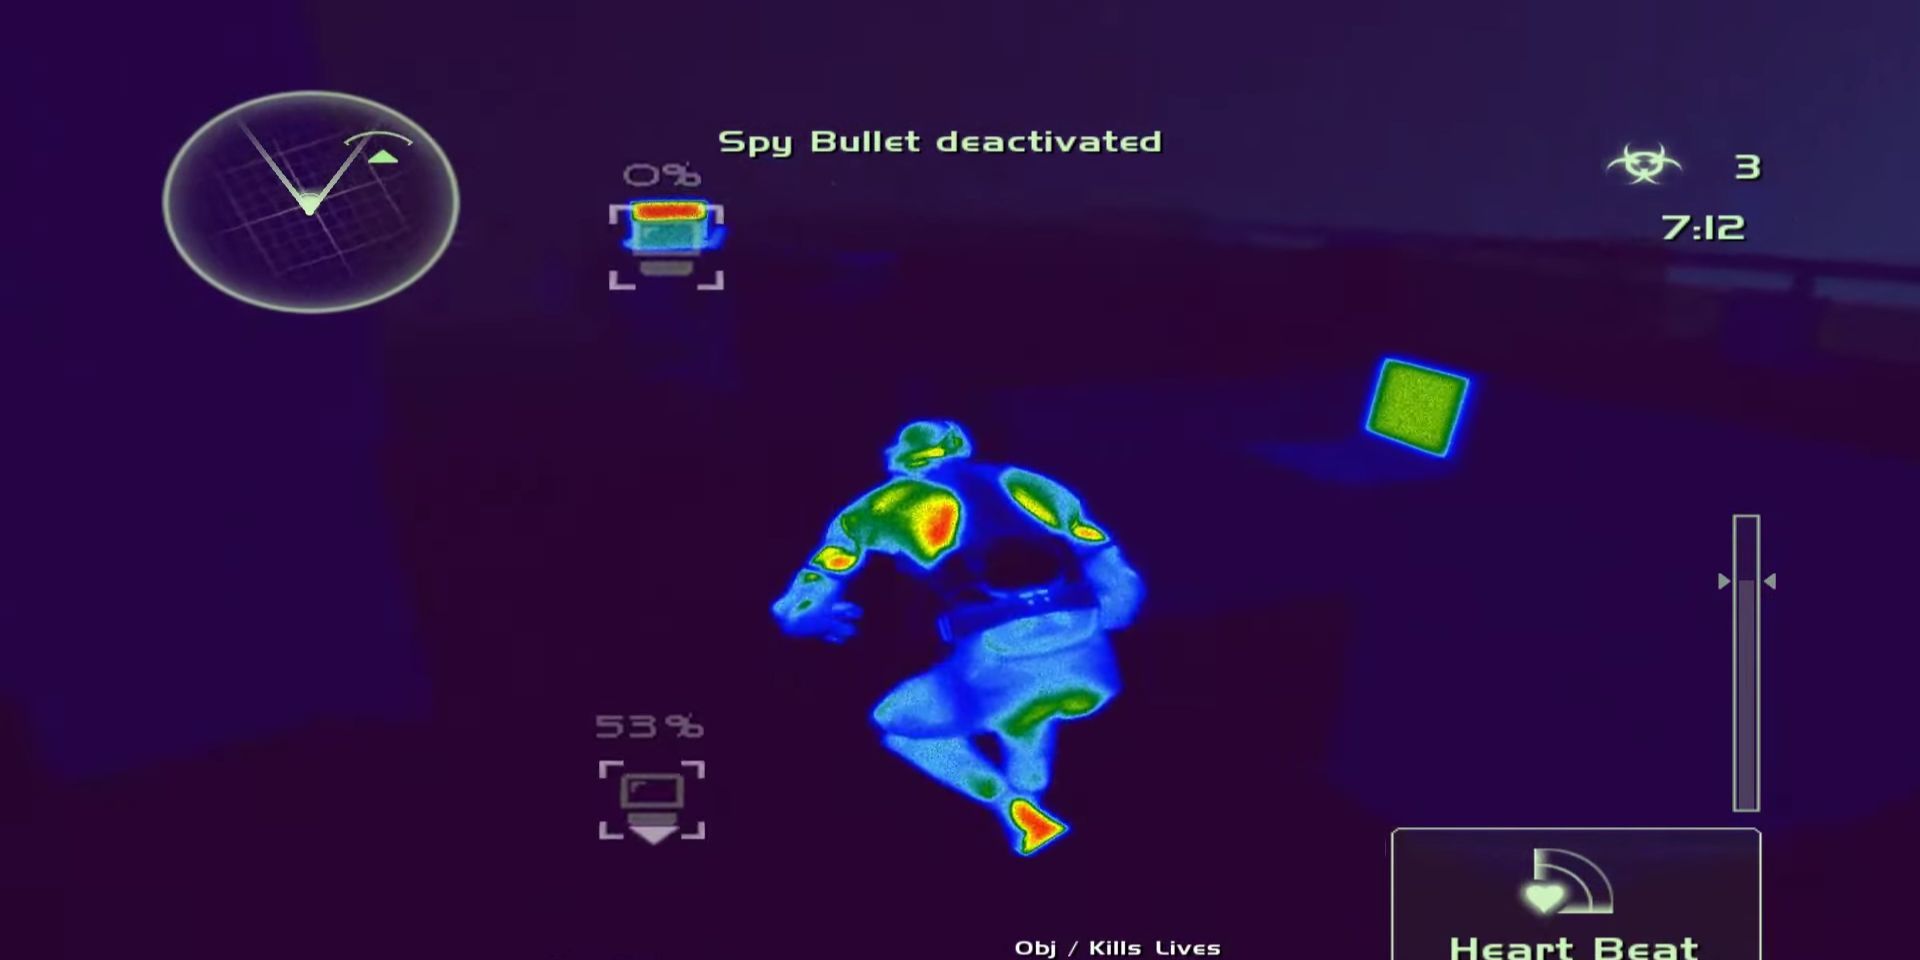 Thermographic vision in Splinter Cell Chaos Theory